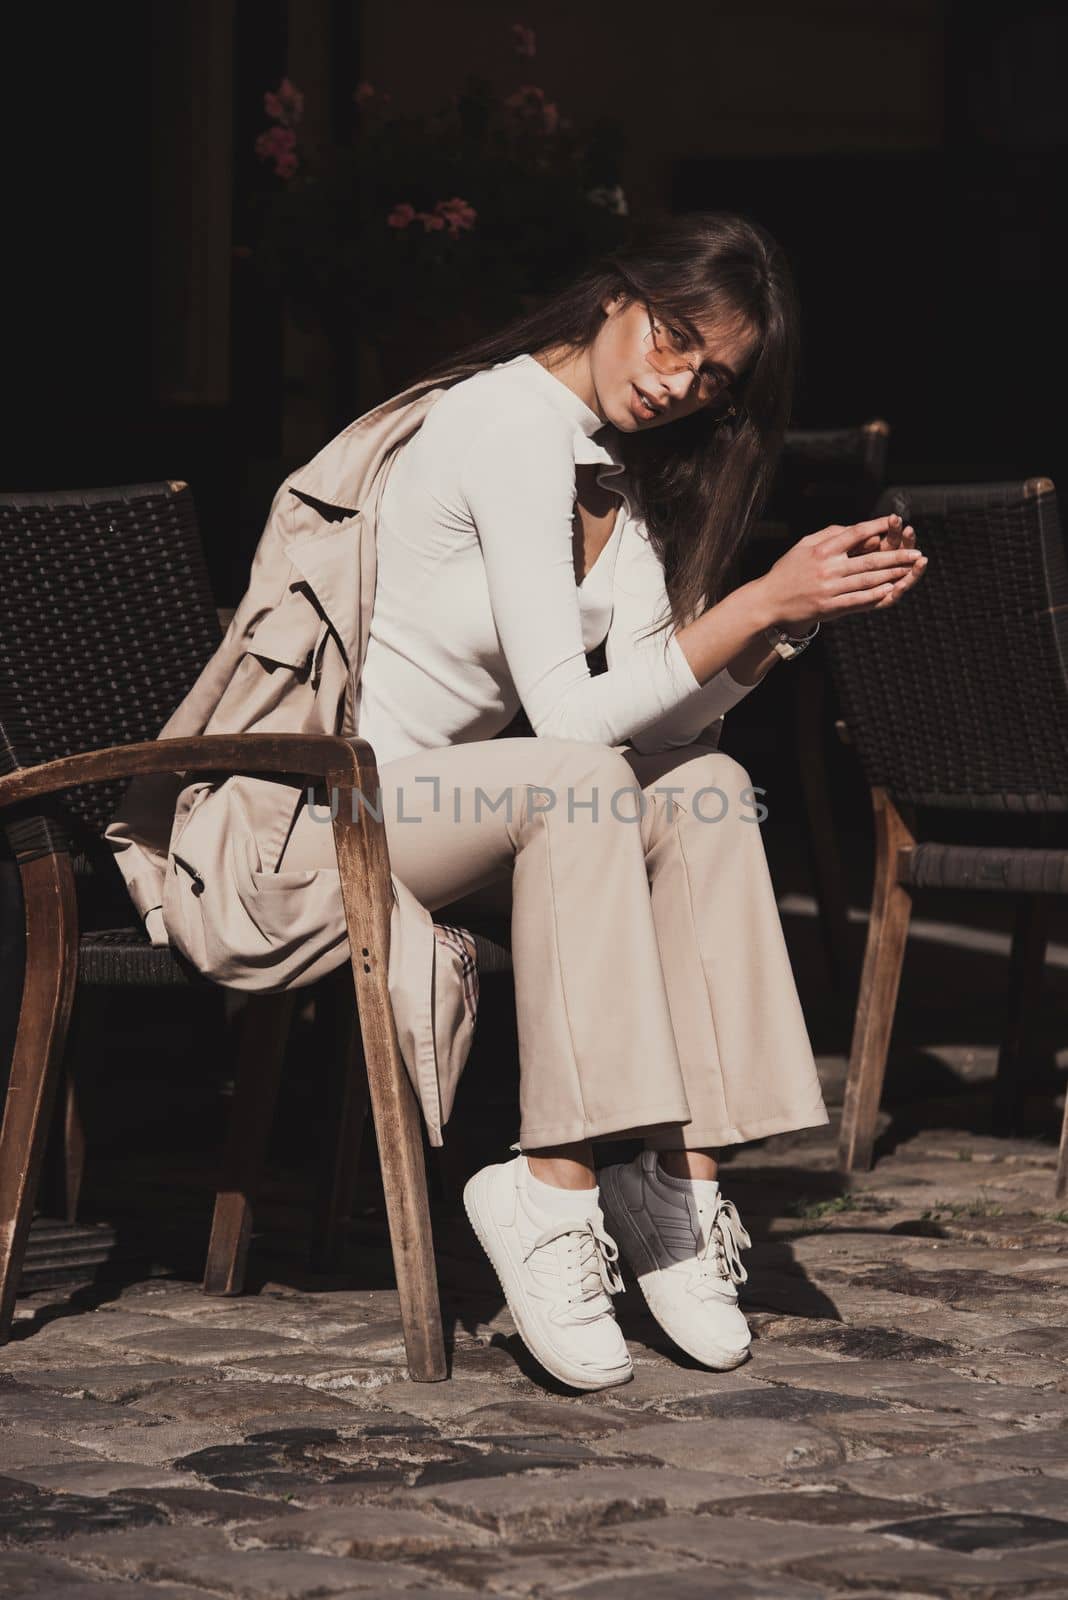 beautiful brunette girl dressed in white blouse, pants, sneakers with a handbag and camel coat in hands. Stylish trendy fashion outlook by Ashtray25